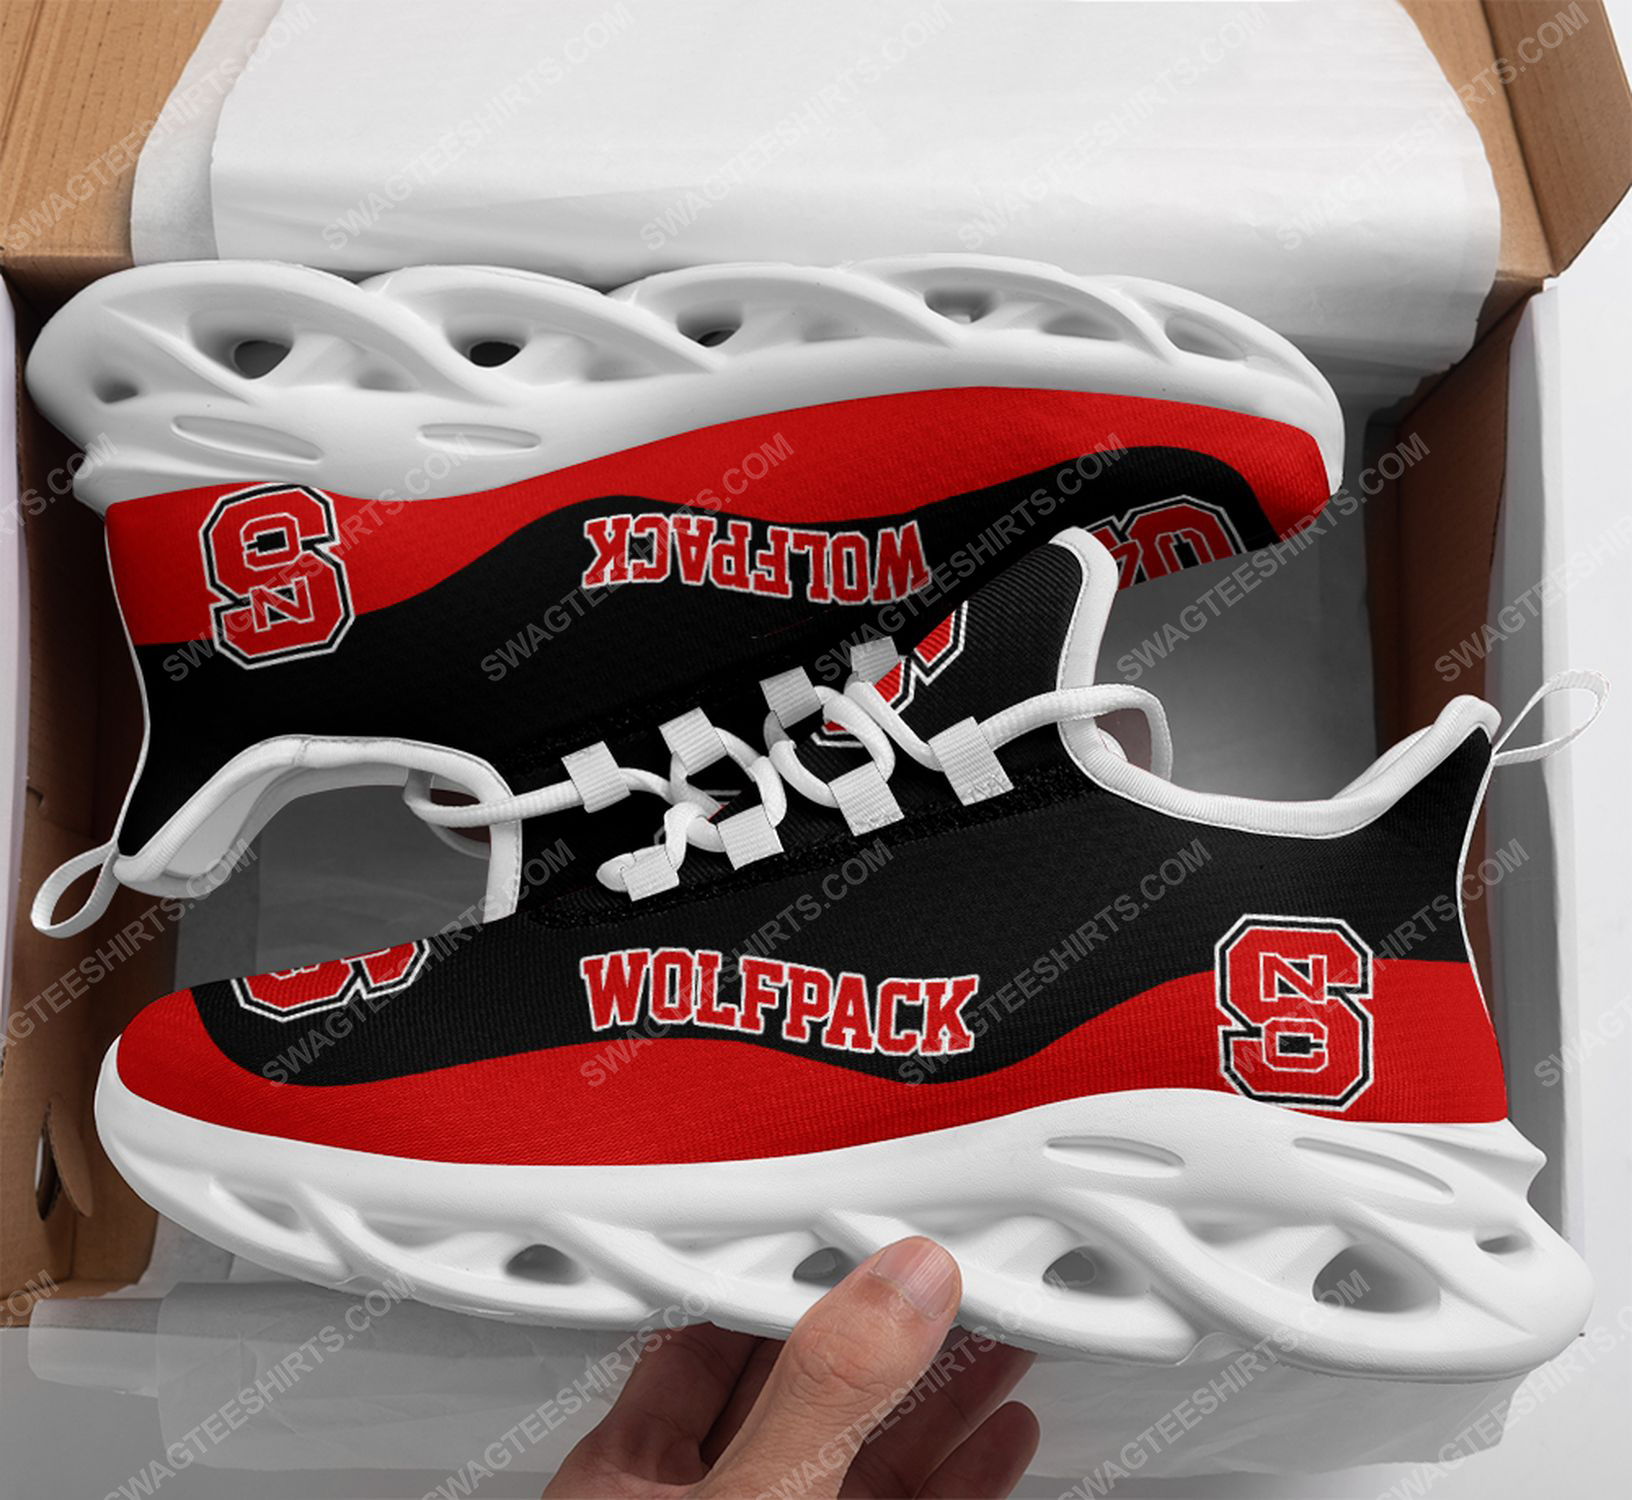 The nc state wolfpack football team max soul shoes 1